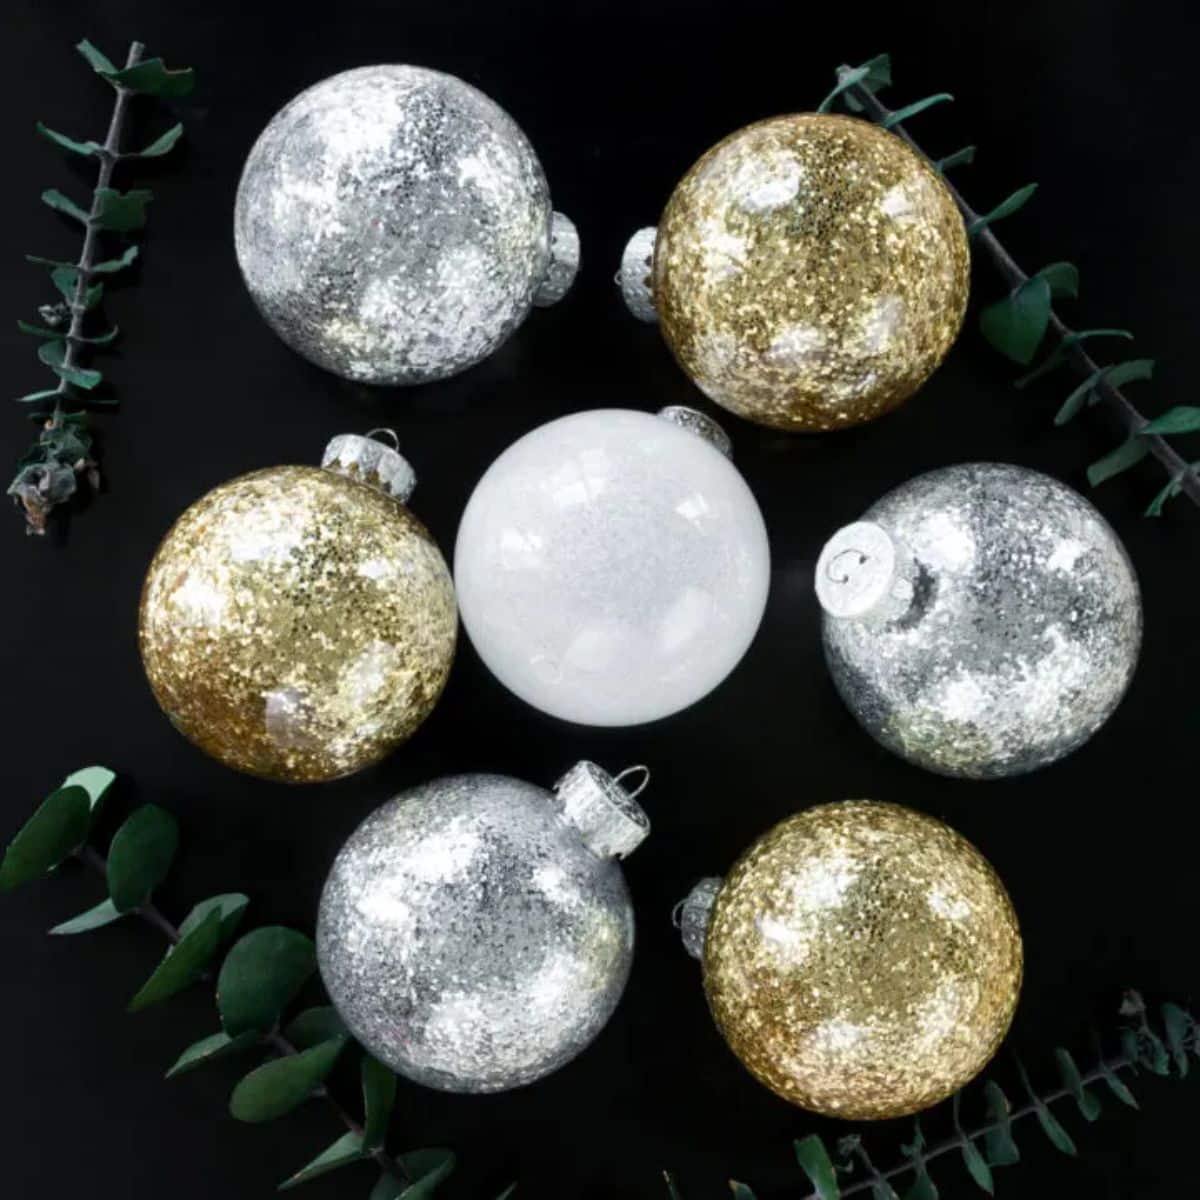 7 different DIY projects for clear ball ornaments